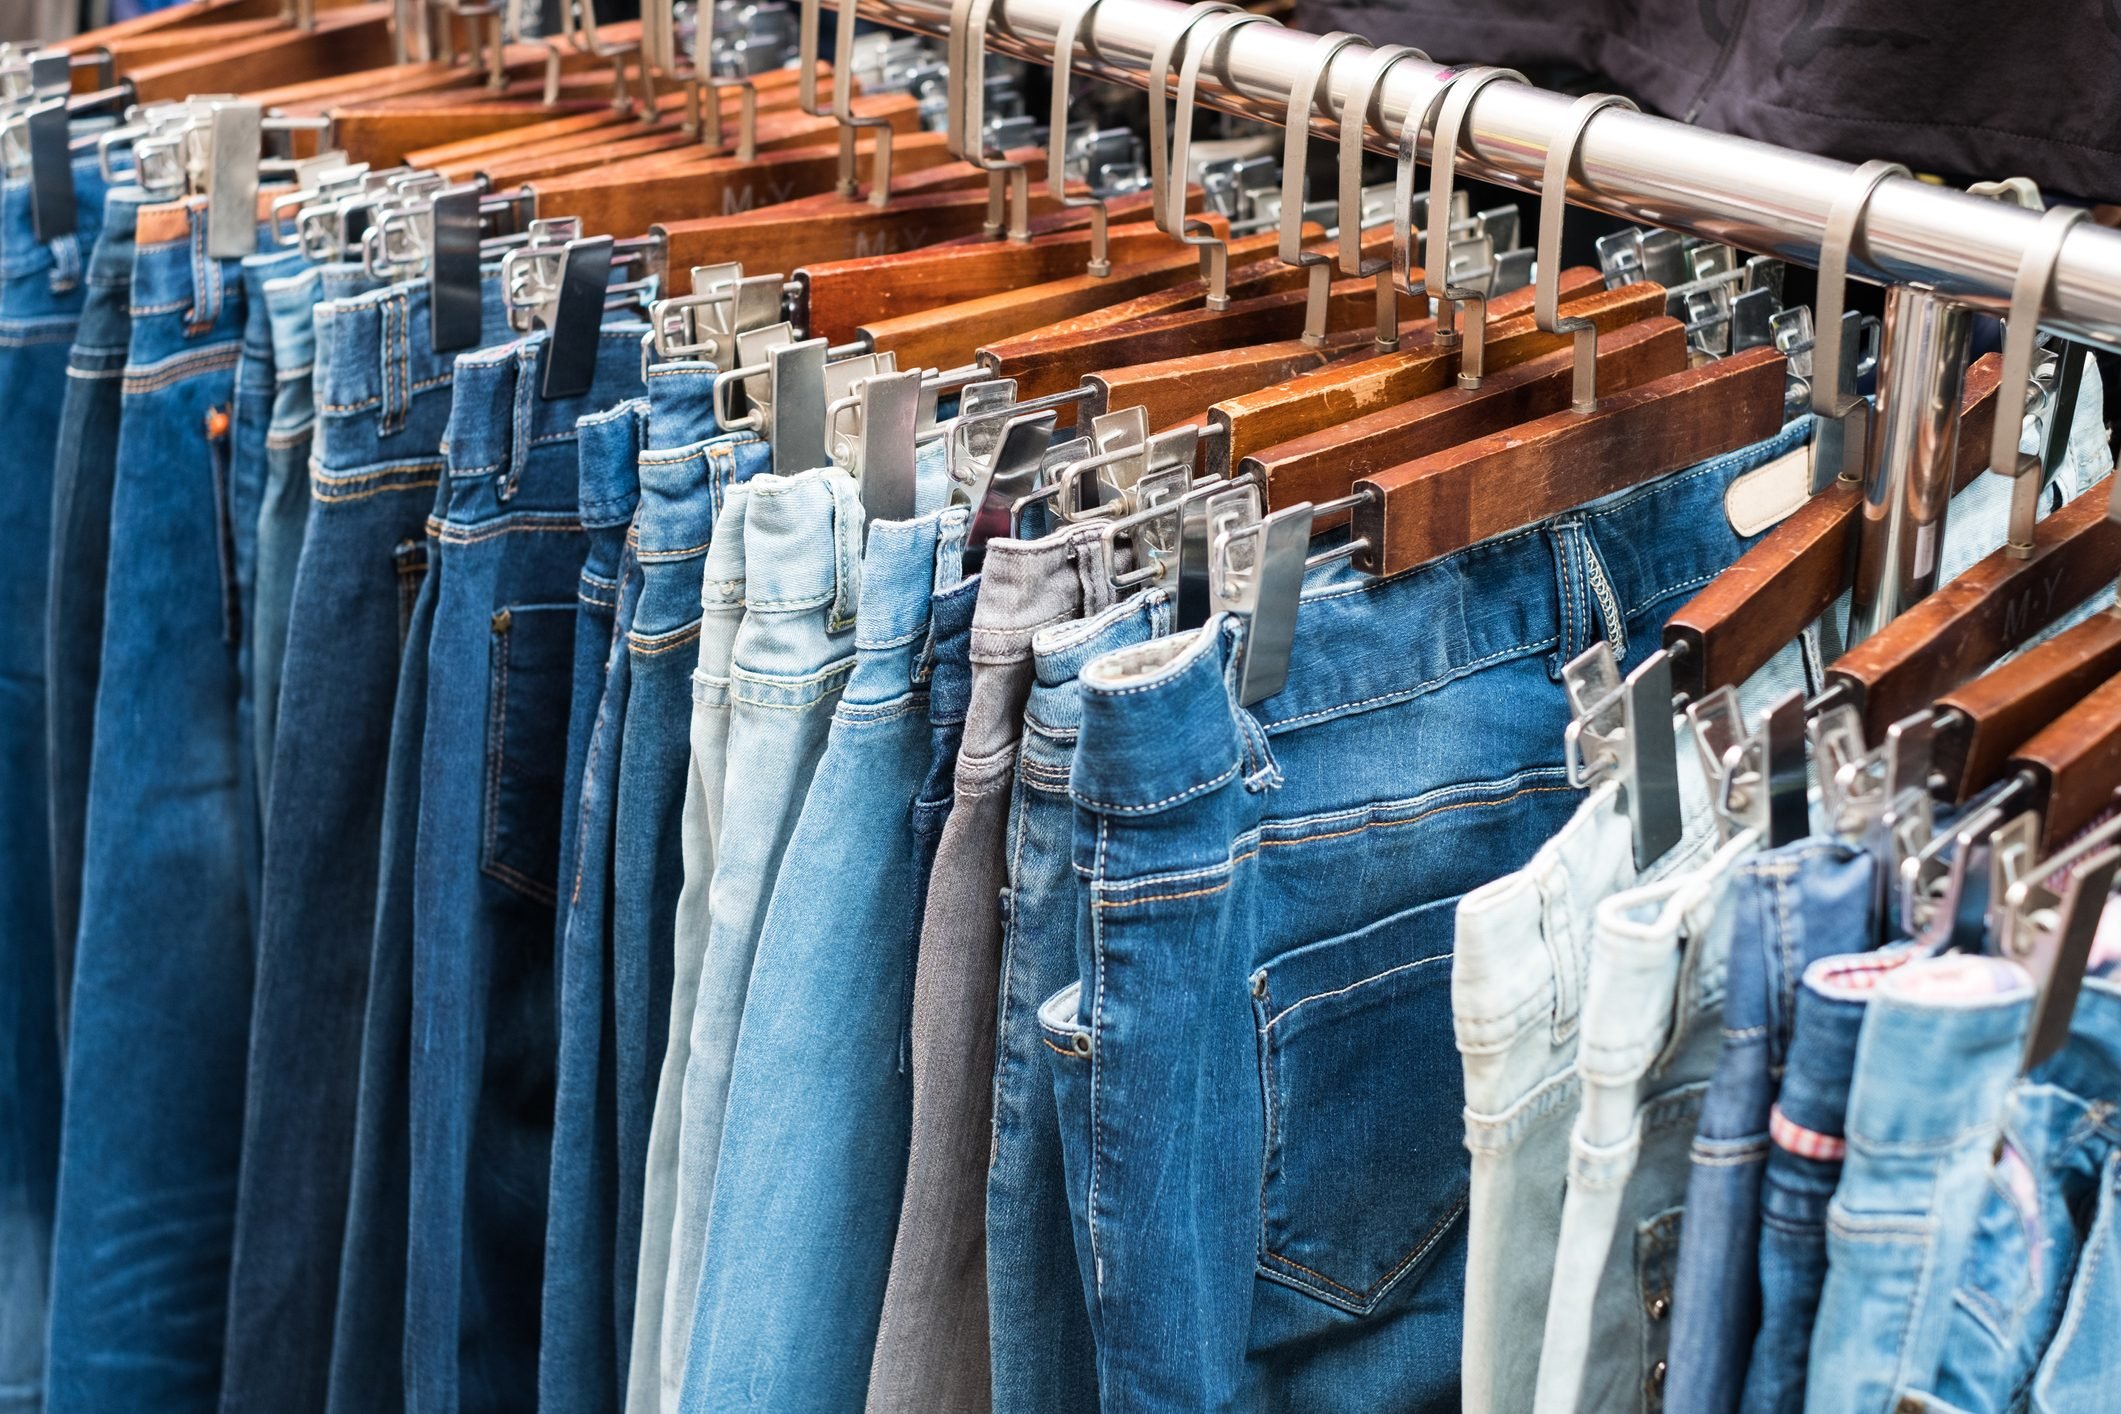 jeans on hangers, second hand clothing -